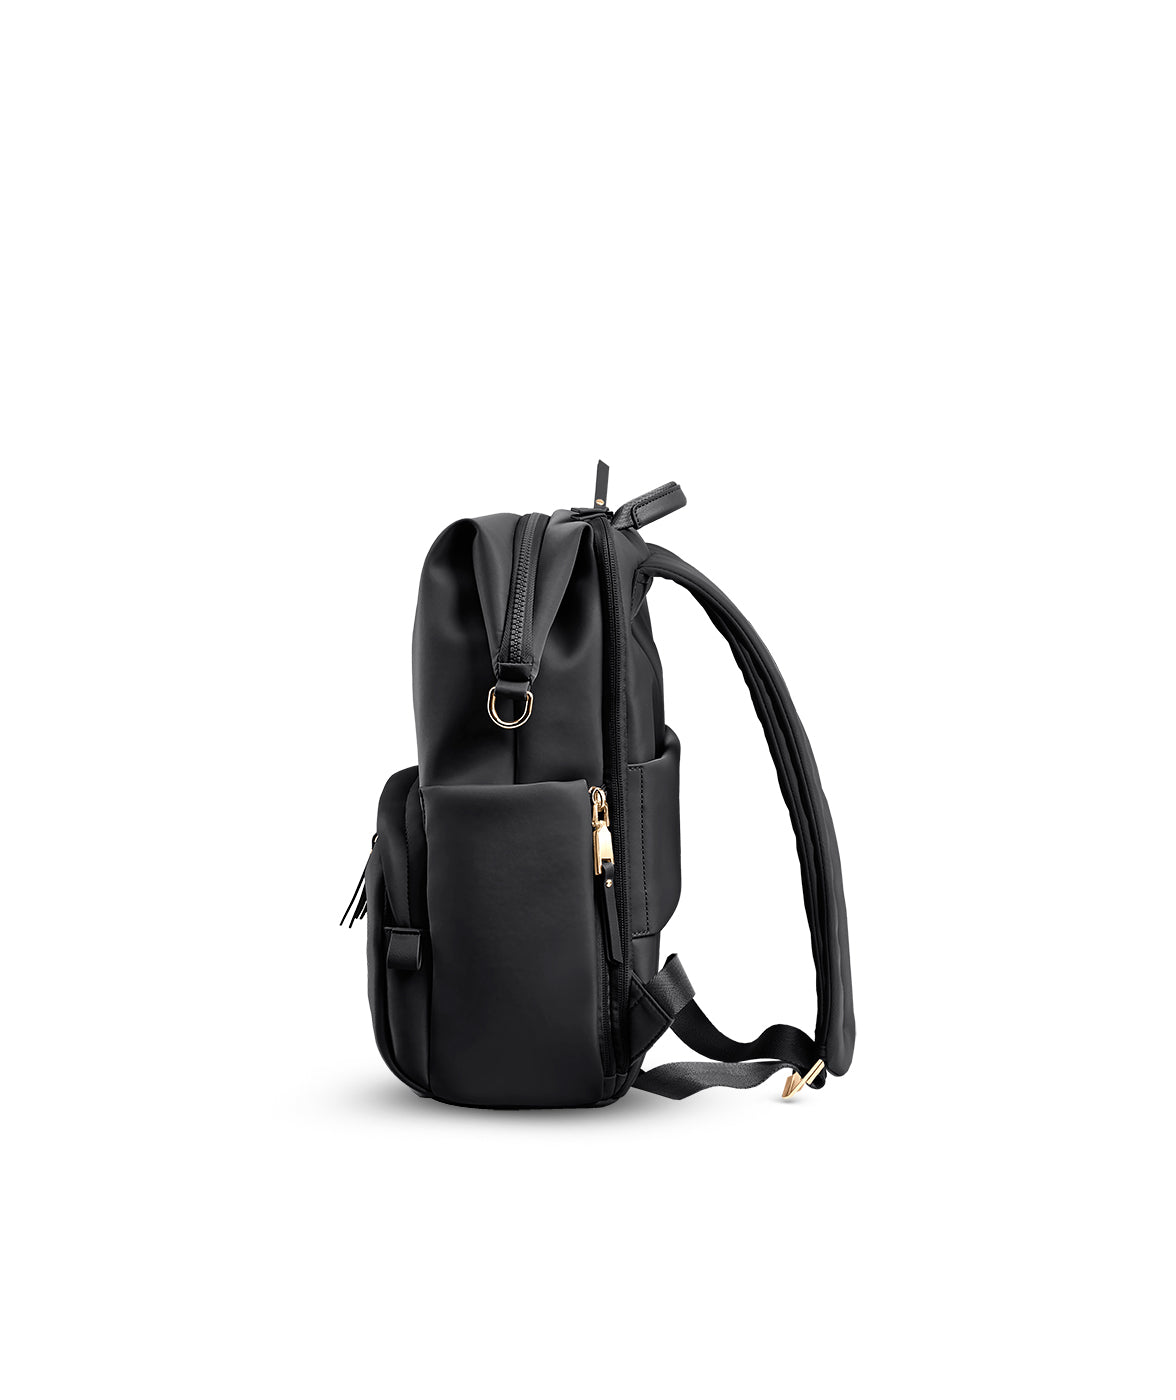 Purist Backpack